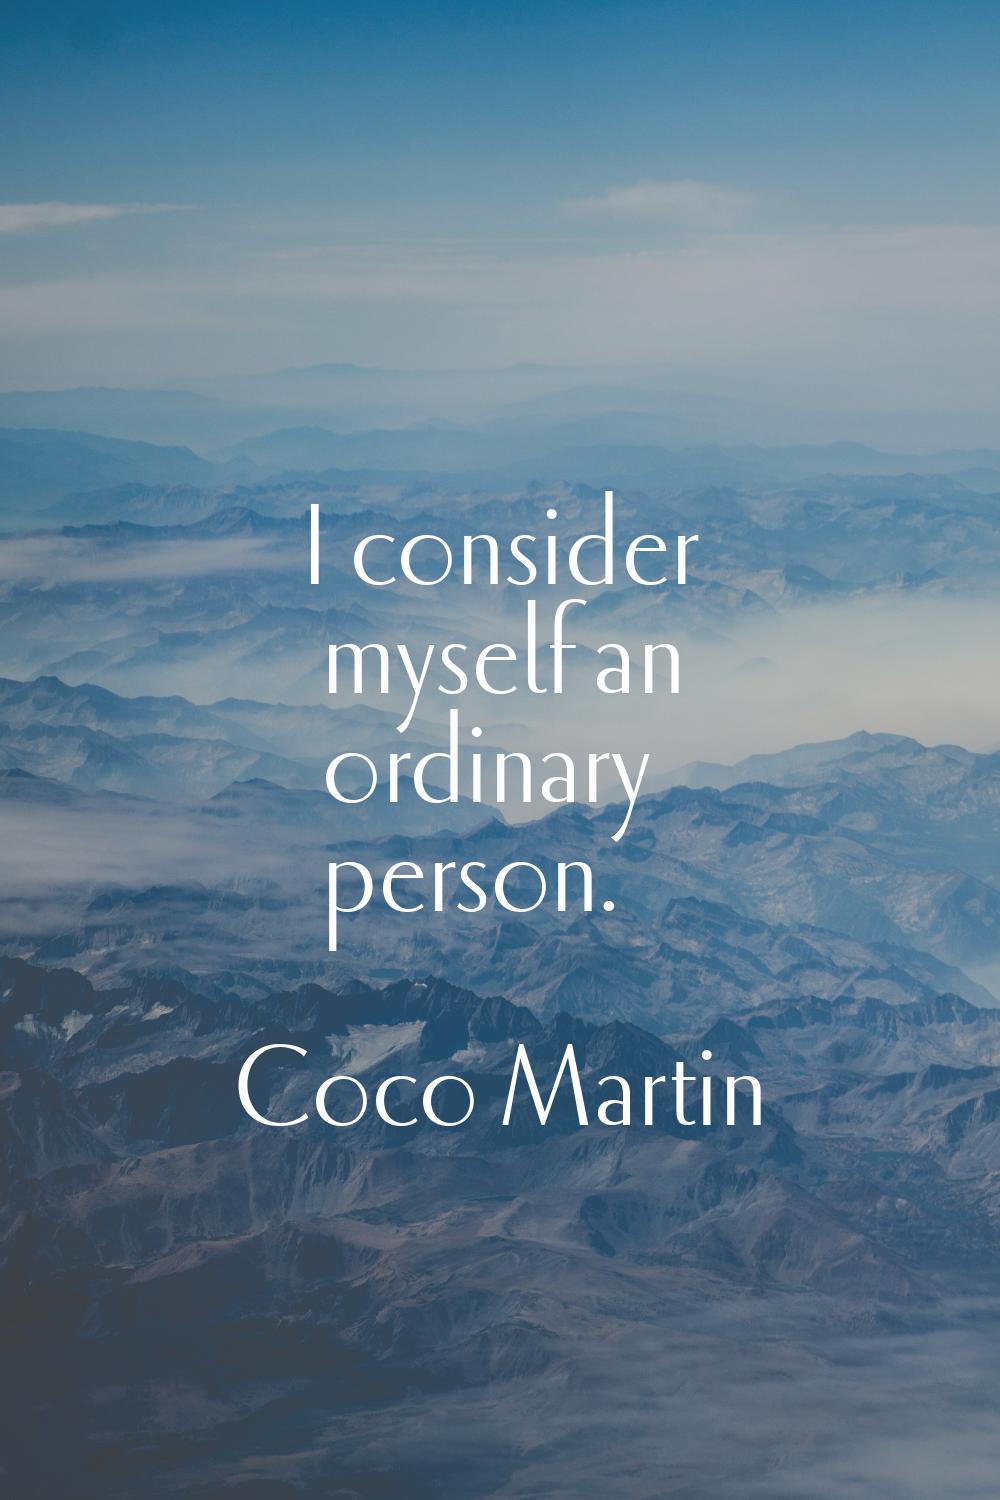 I consider myself an ordinary person.